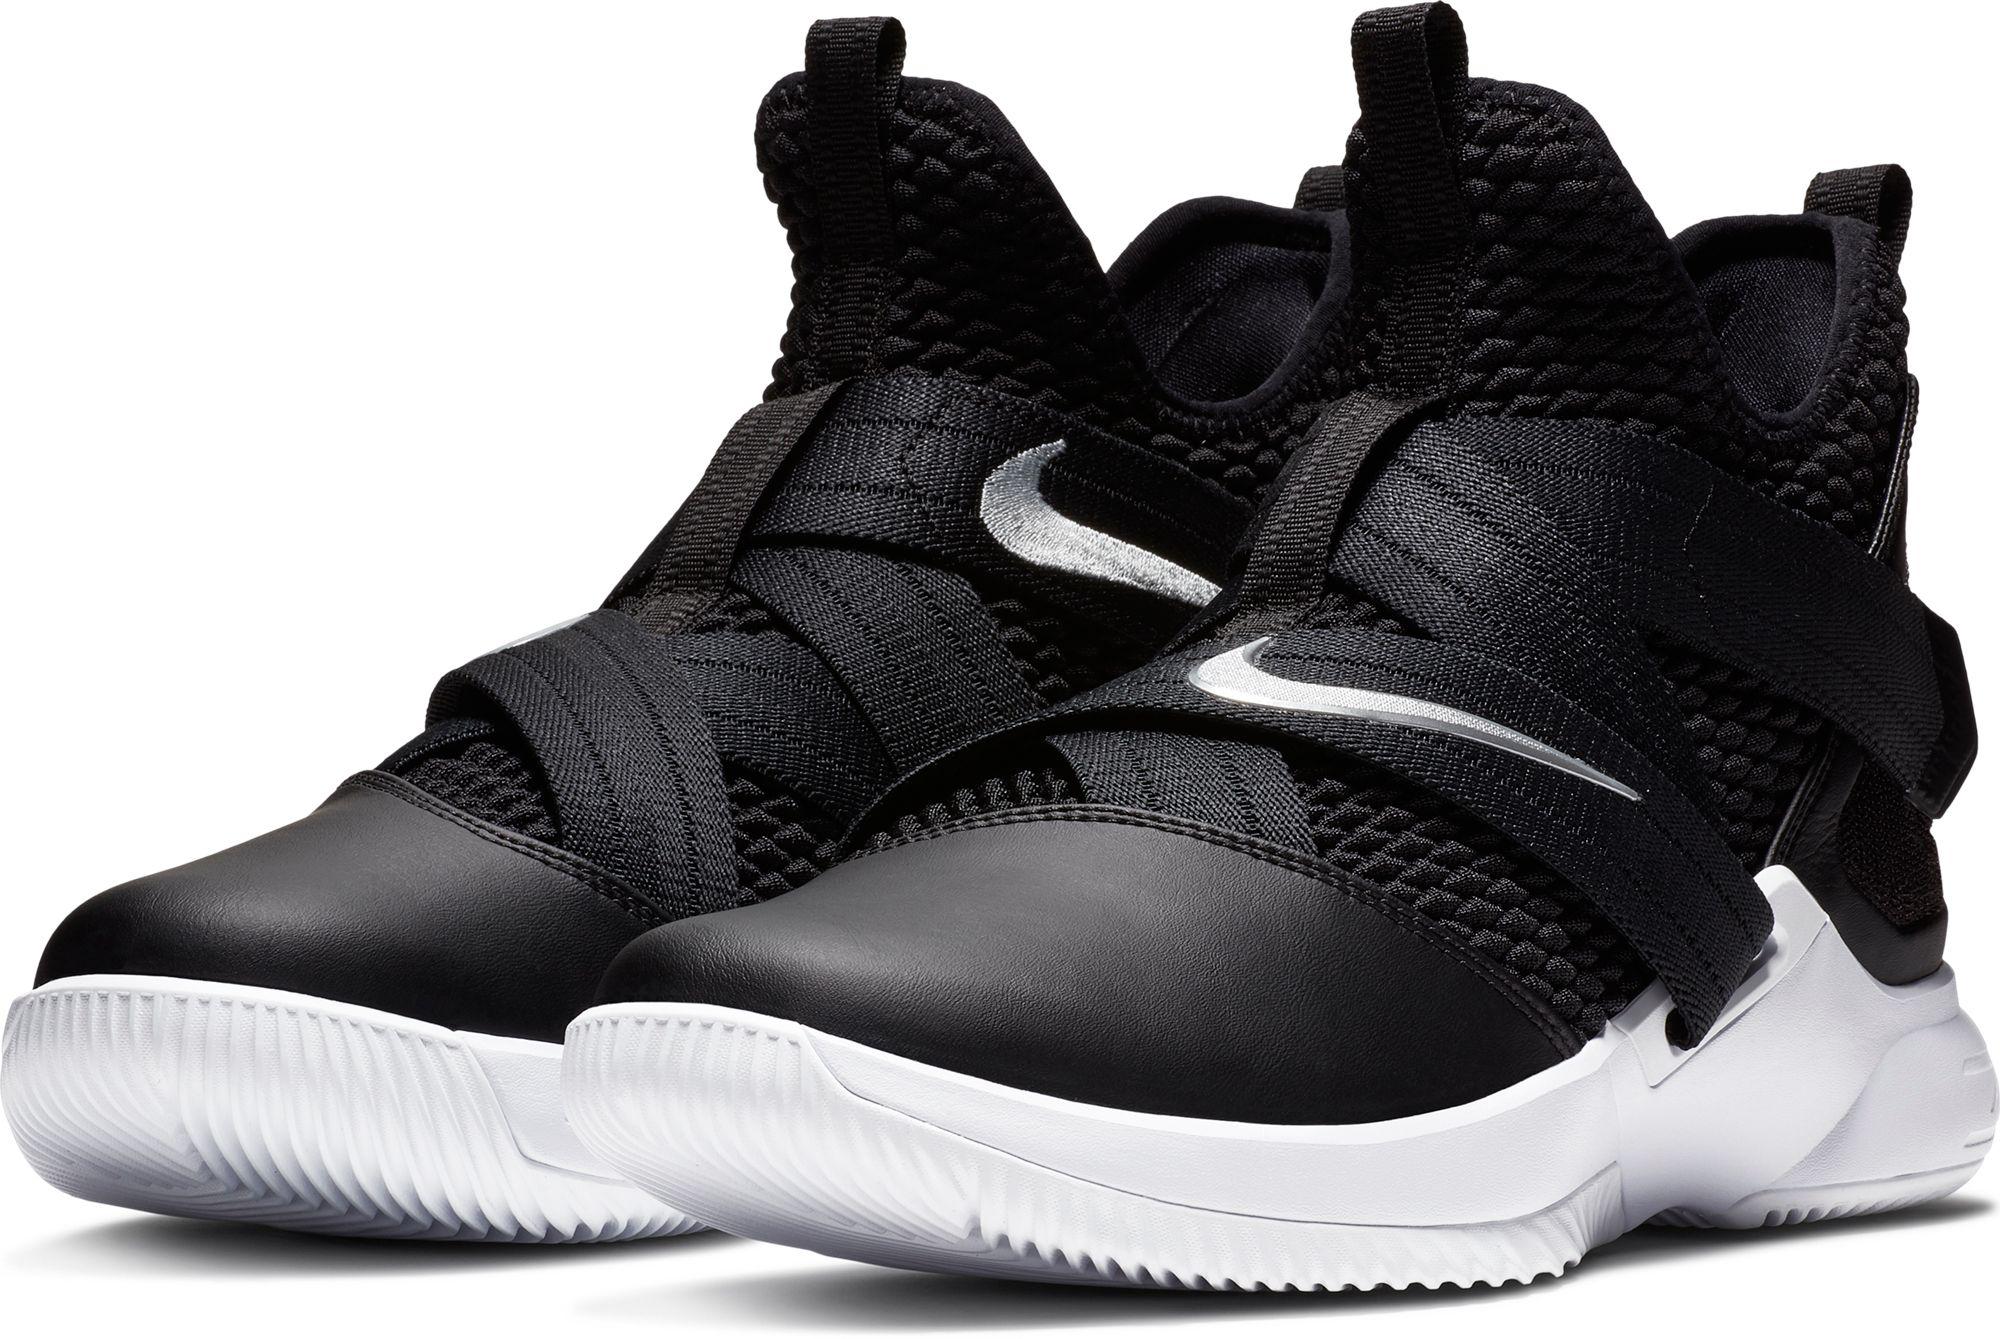 Nike Zoom Lebron Soldier 12 Basketball Shoes in Black